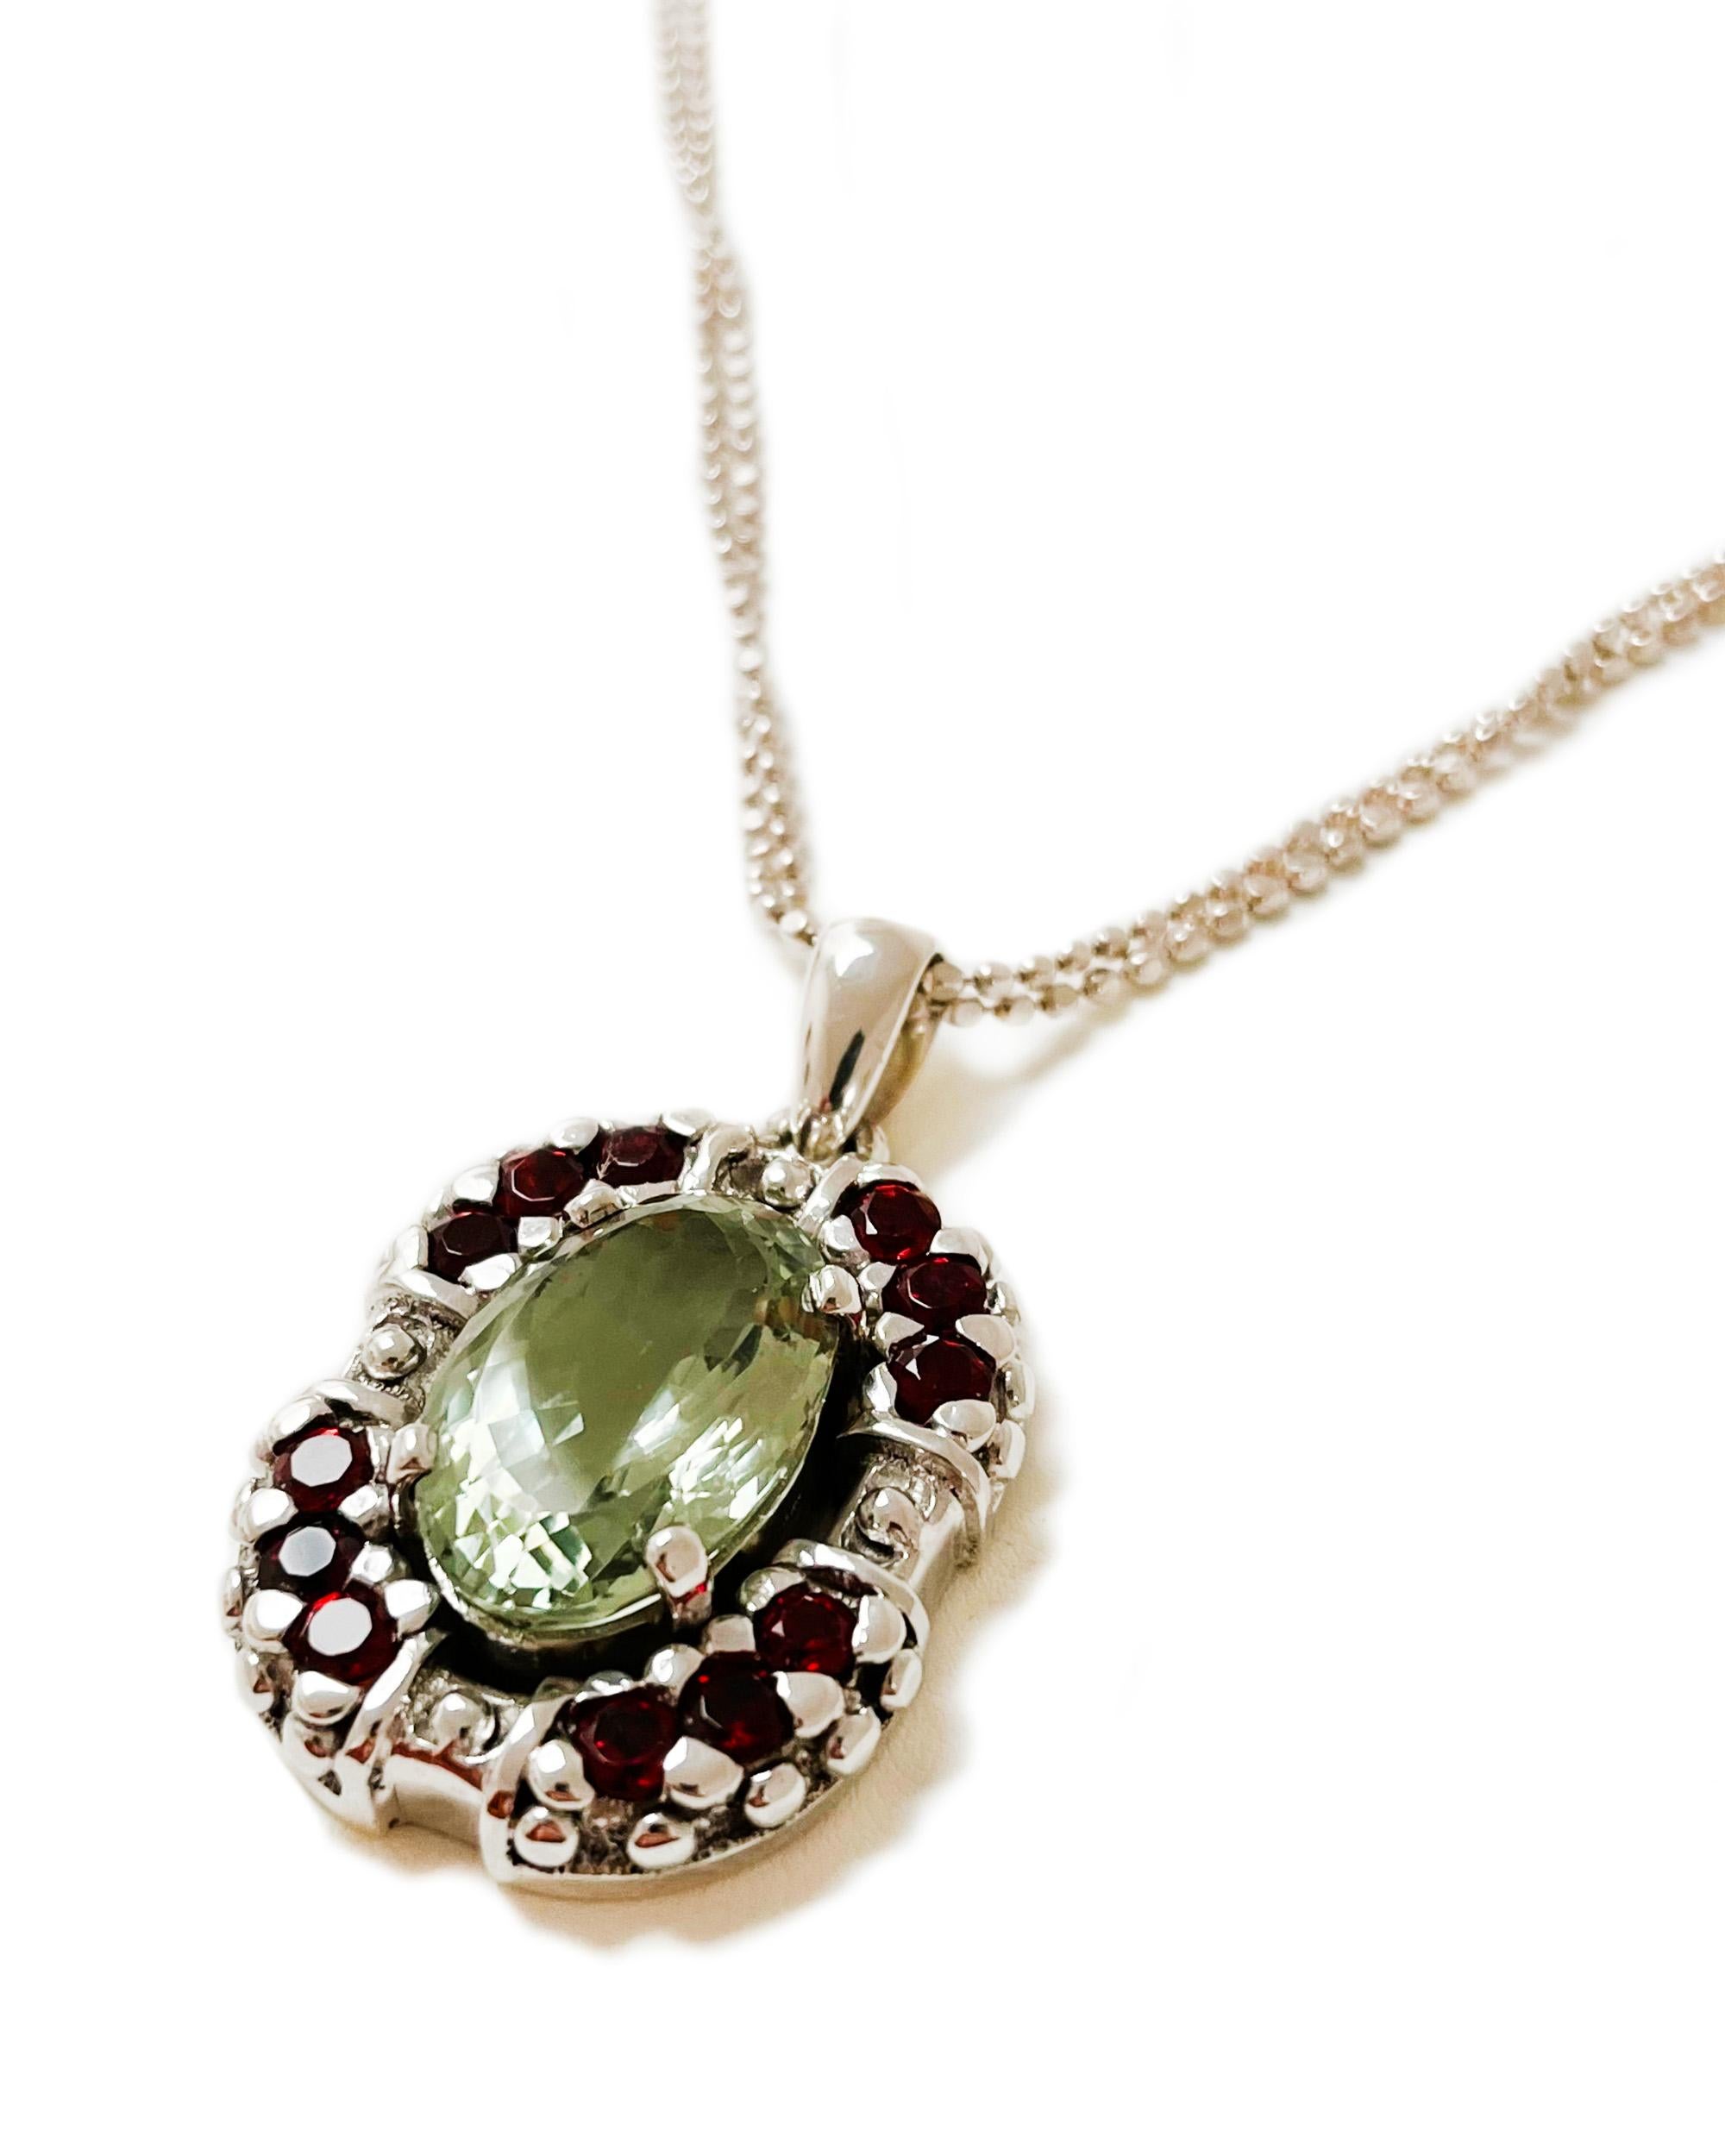 Design:This highly textured piece derives its interest from contrast and craftsmanship. The beaded, tarnish- resistant Argentium silver chain provides a nice complement to the prasiolite and garnet pendant that swings below. It, too, is beaded to